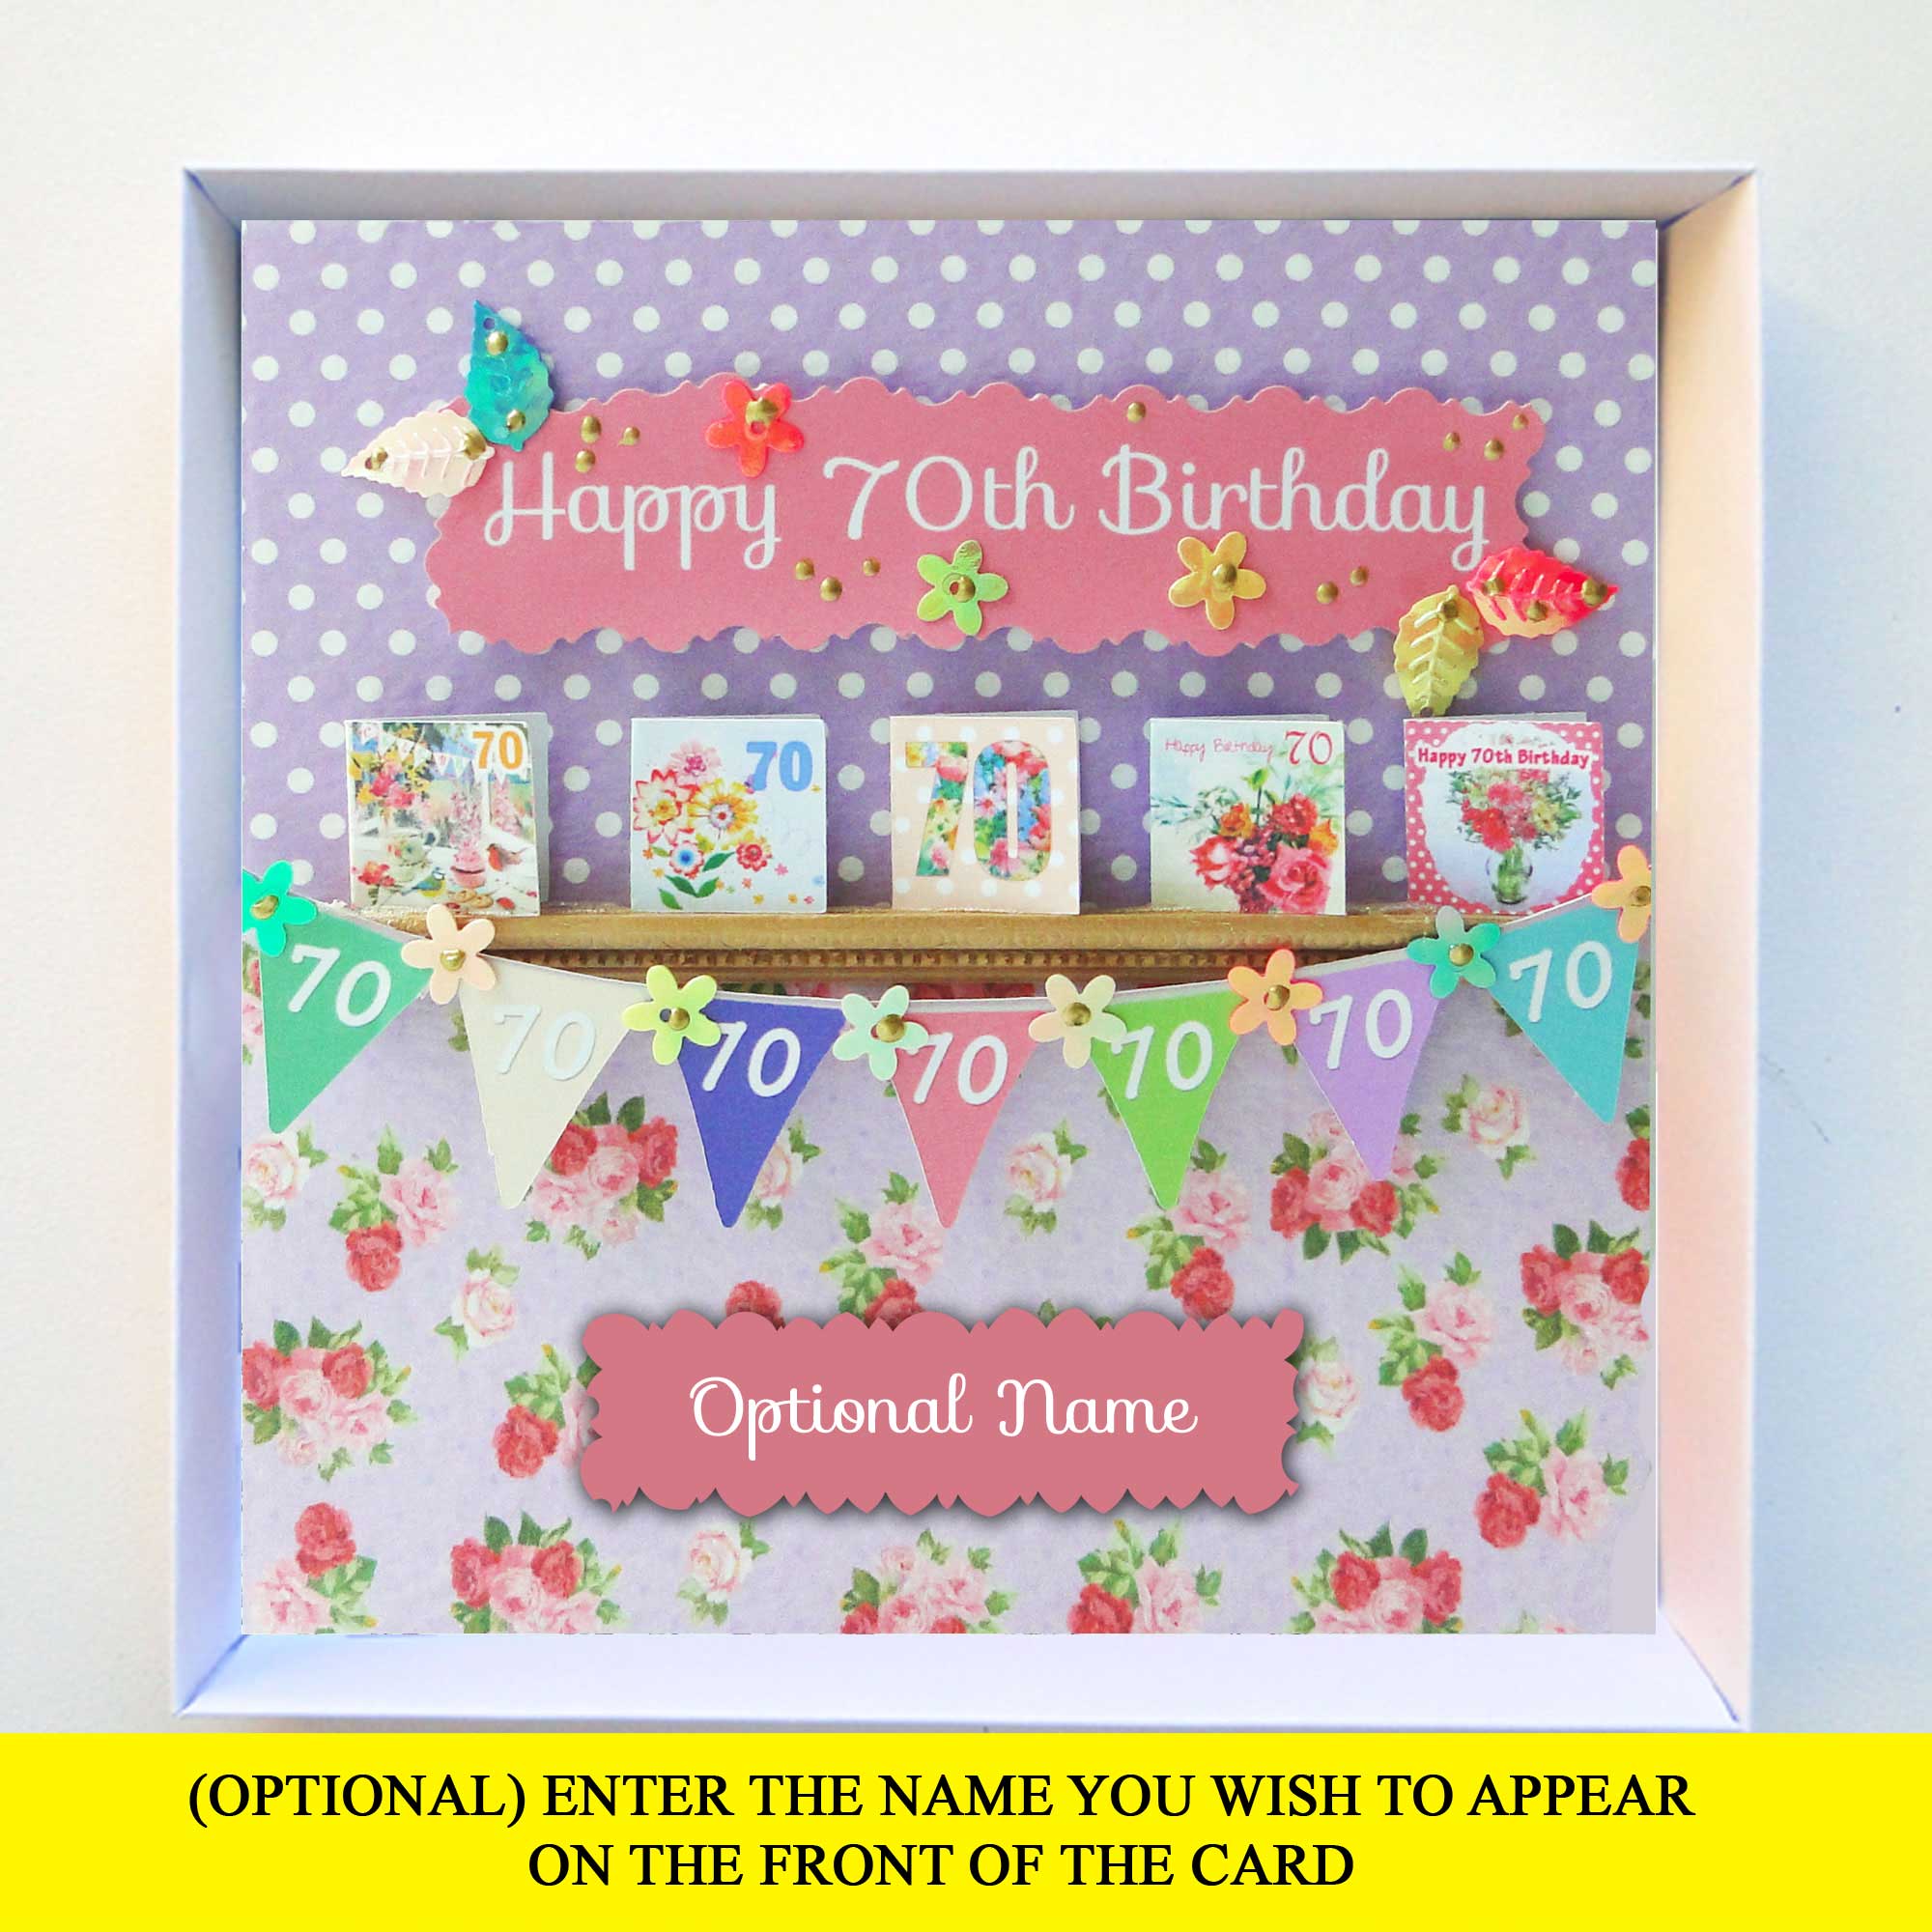 (OPTIONAL) ENTER THE NAME YOU WISH TO APPEAR ON THE FRONT OF THE CARD